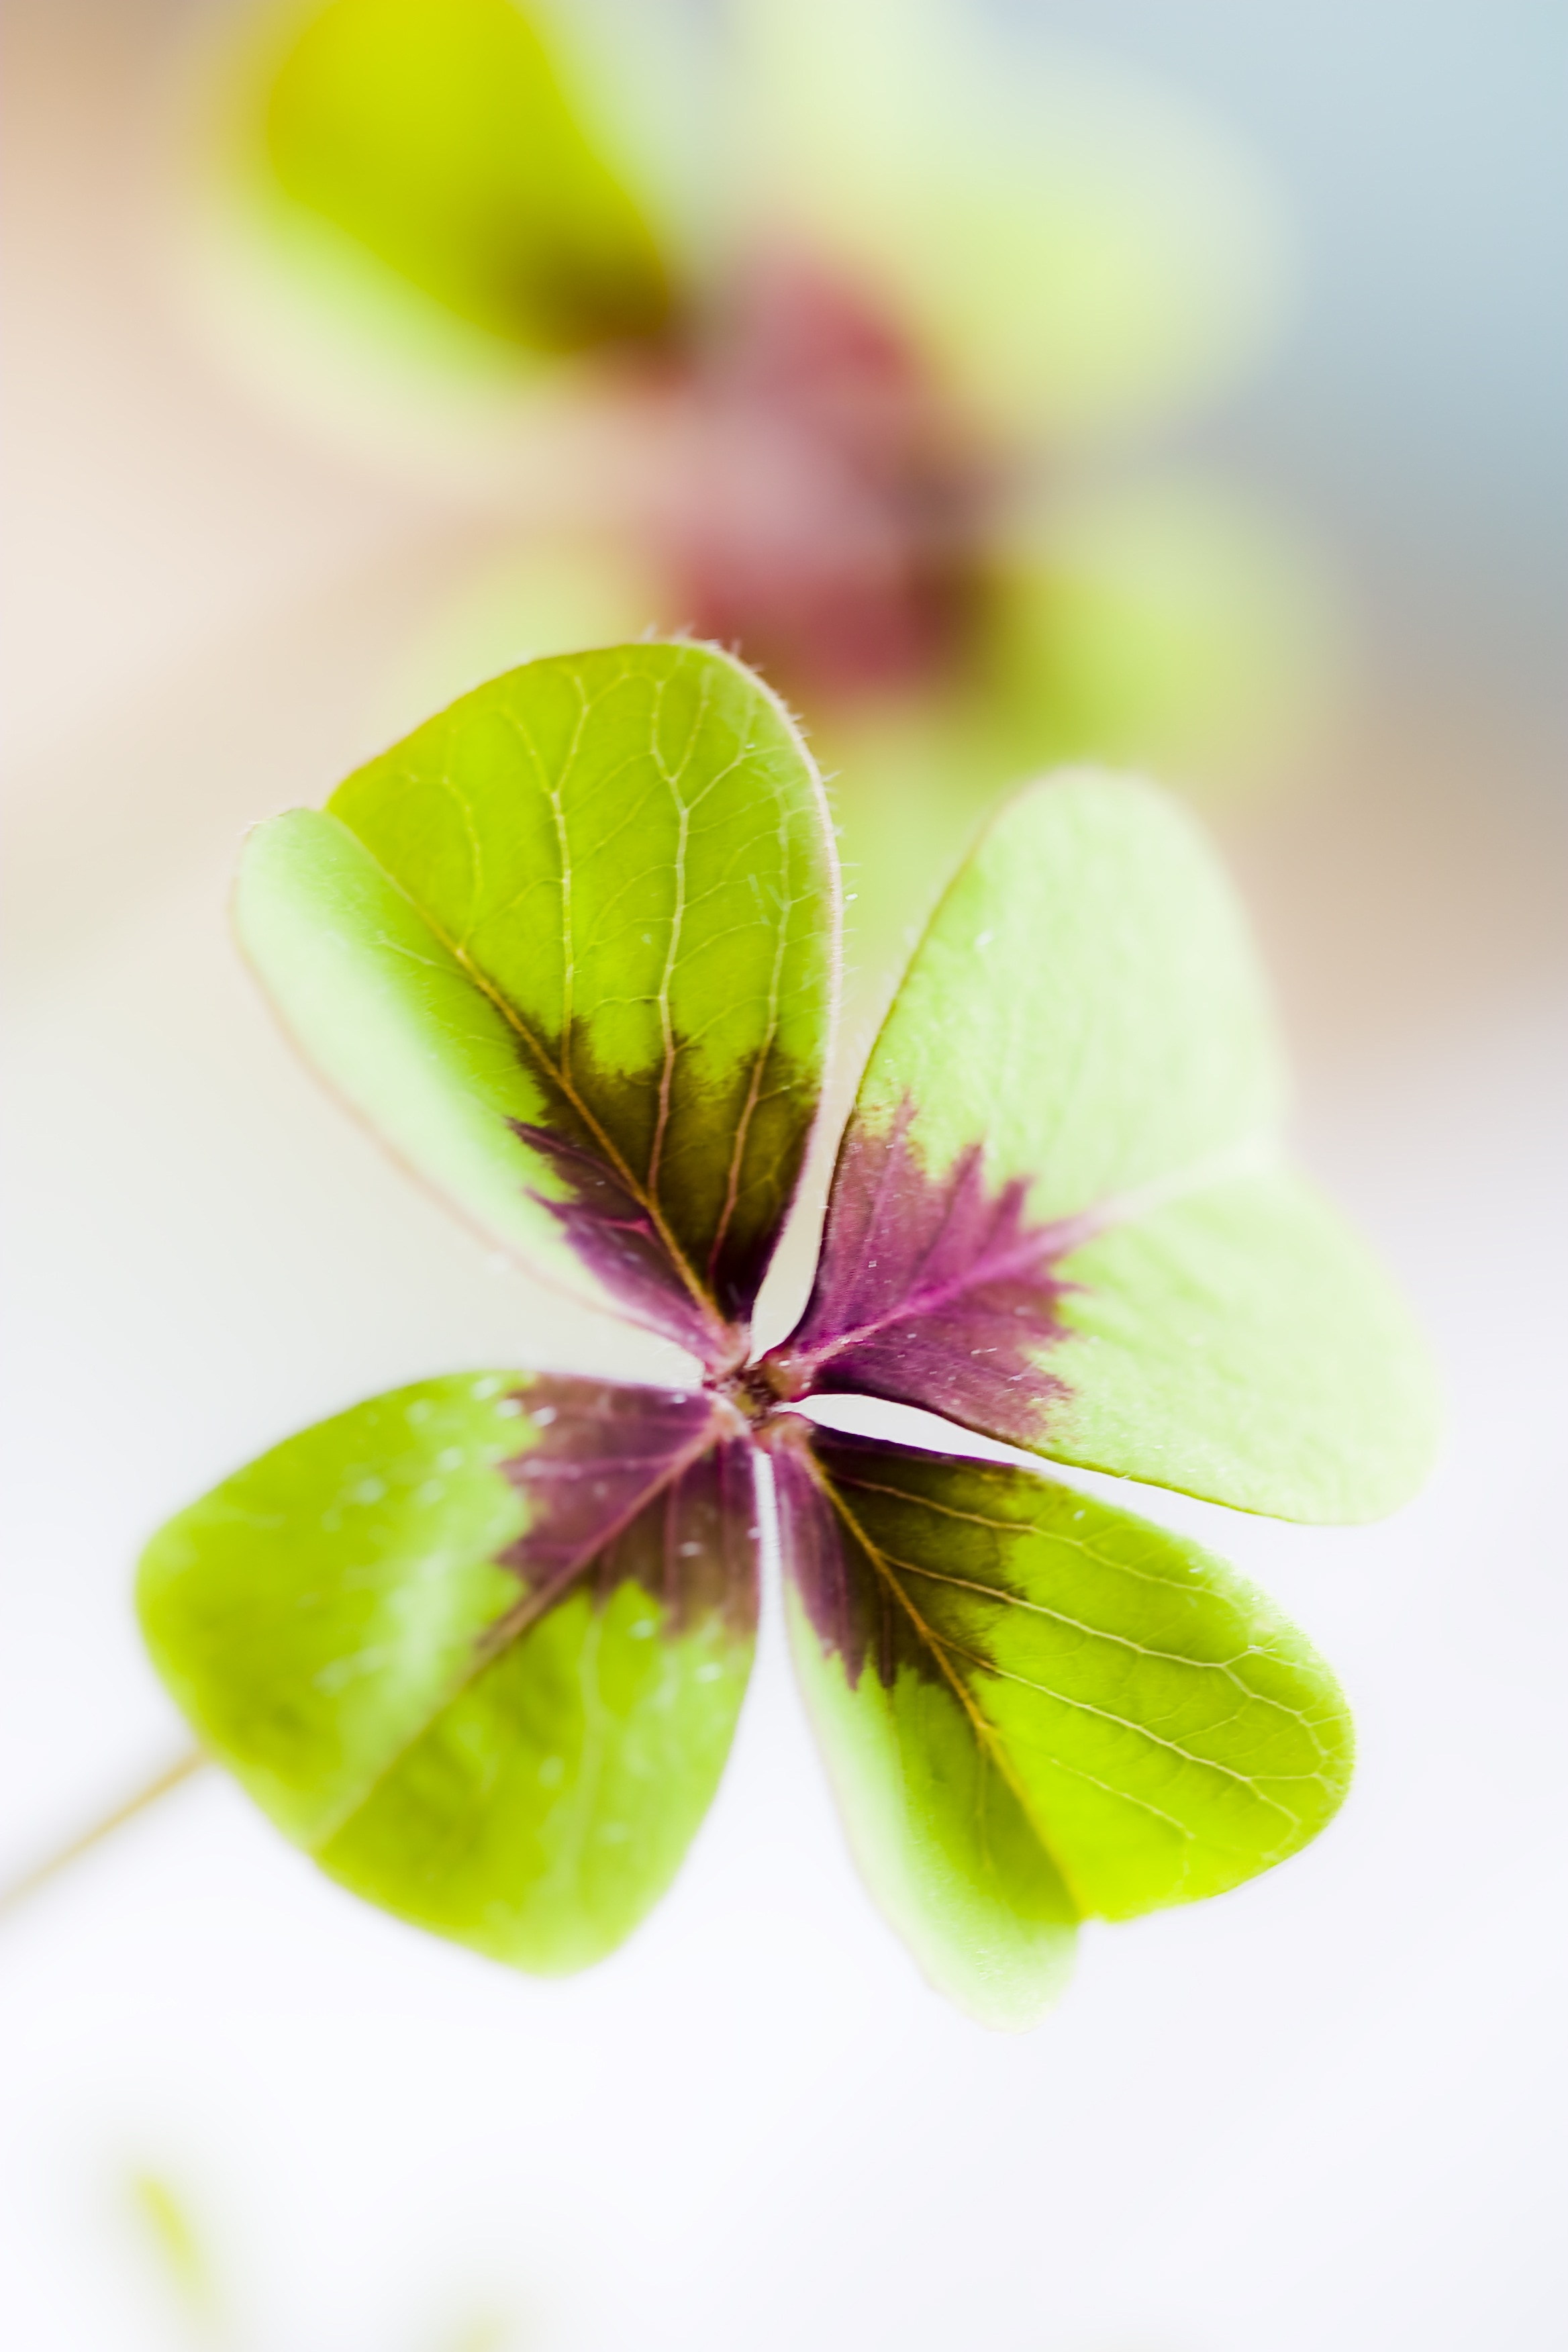 Four Leaf Flower With Purple And Green Leaf - 2336x3504 Wallpaper ...